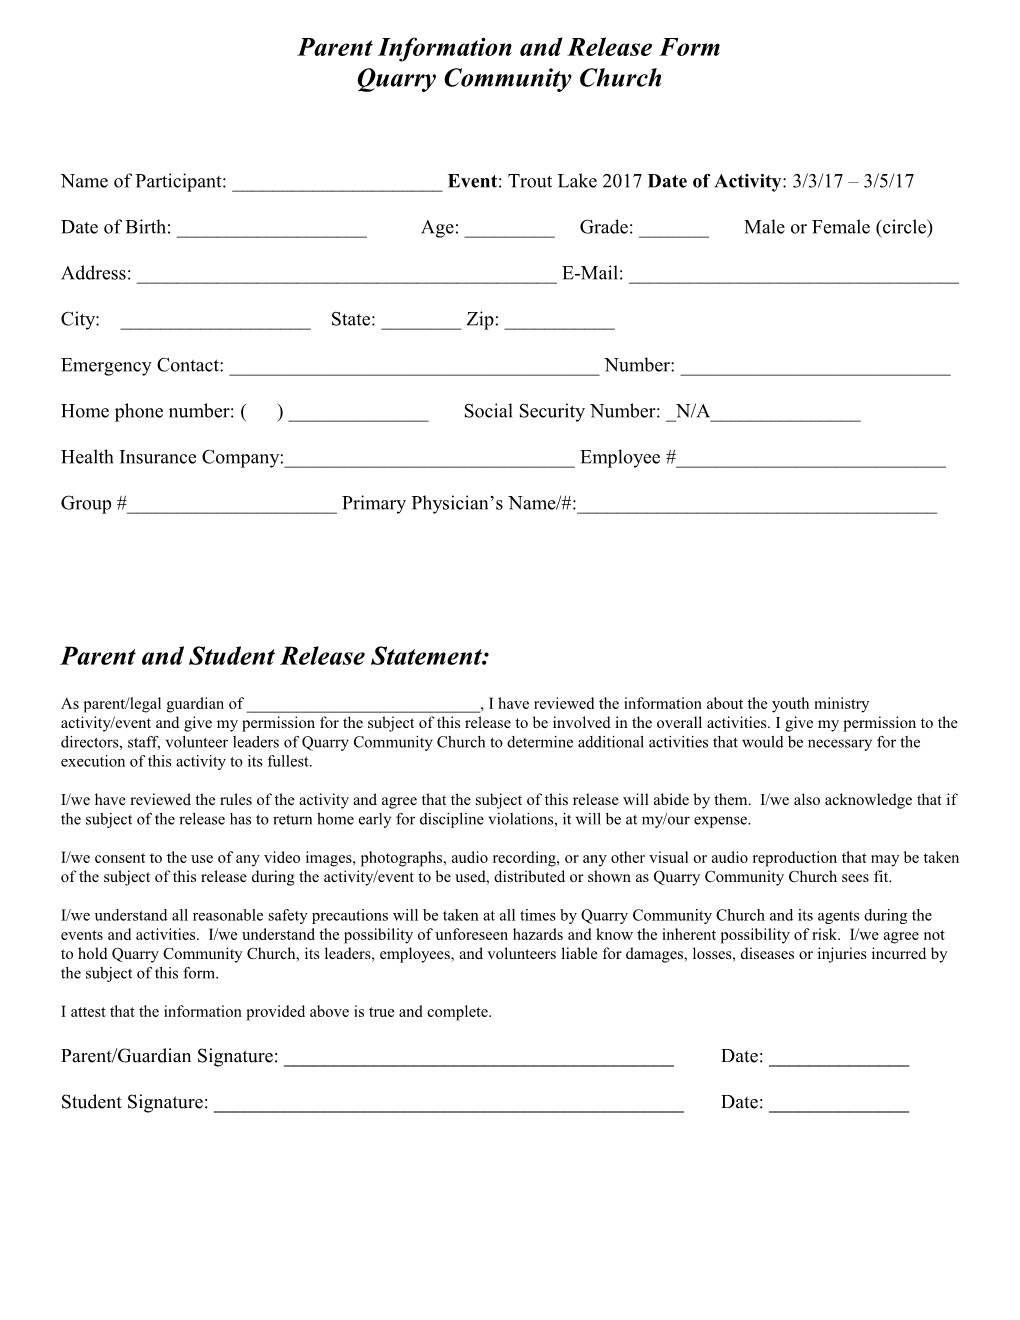 Parent Information and Release Form